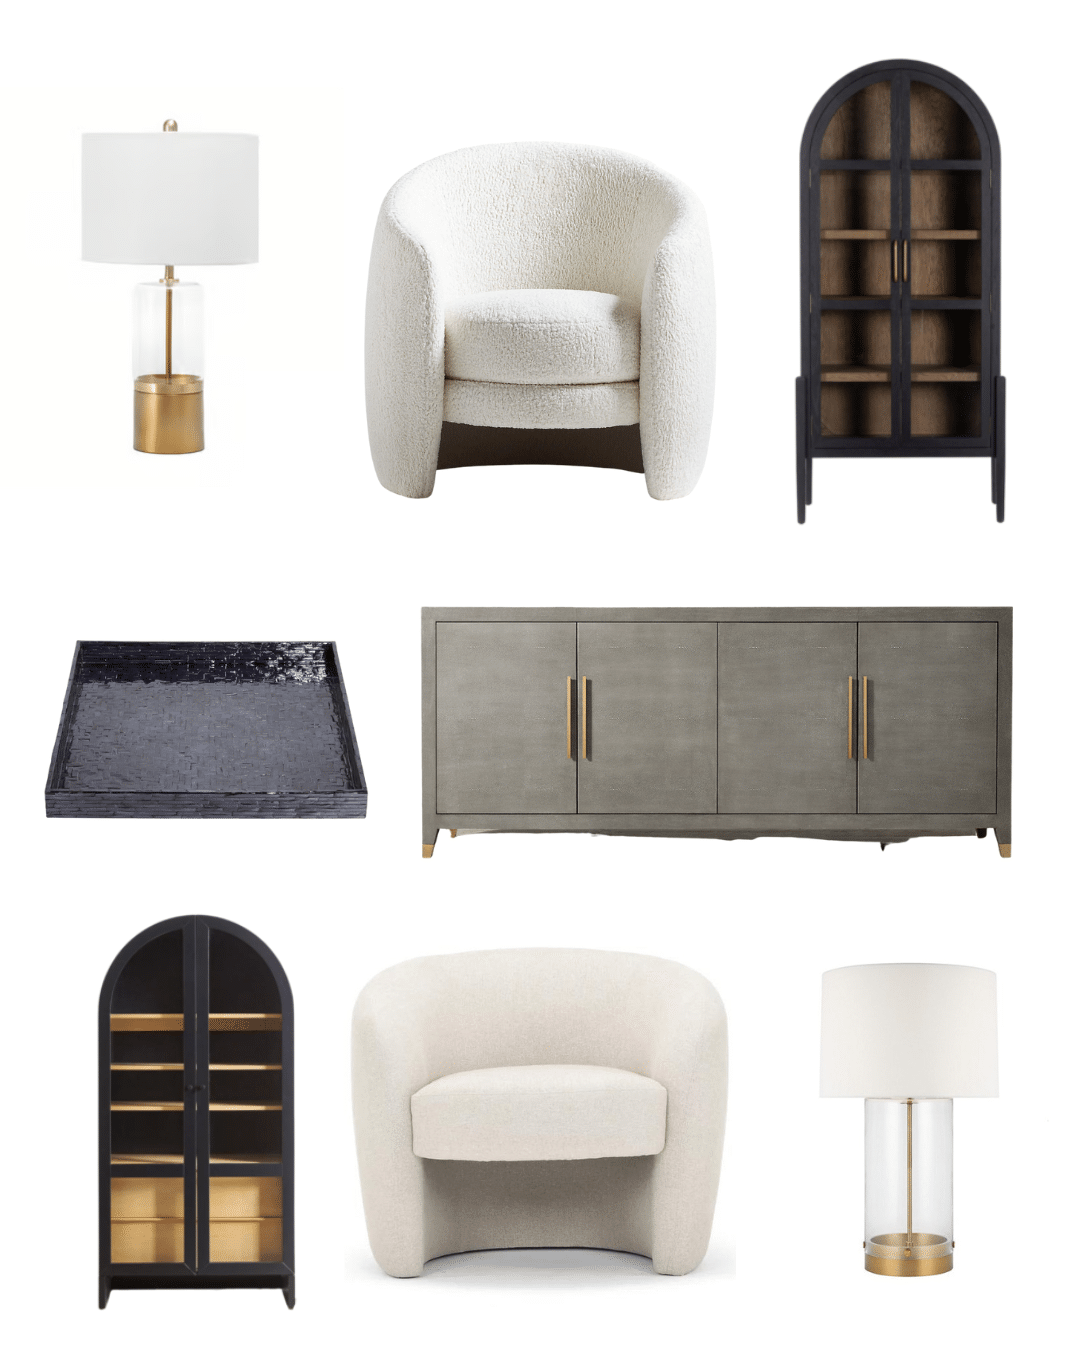 What+Home+Decor+is+Trending+Right+Now+%26%238211%3B+Luxury+vs+Dupes